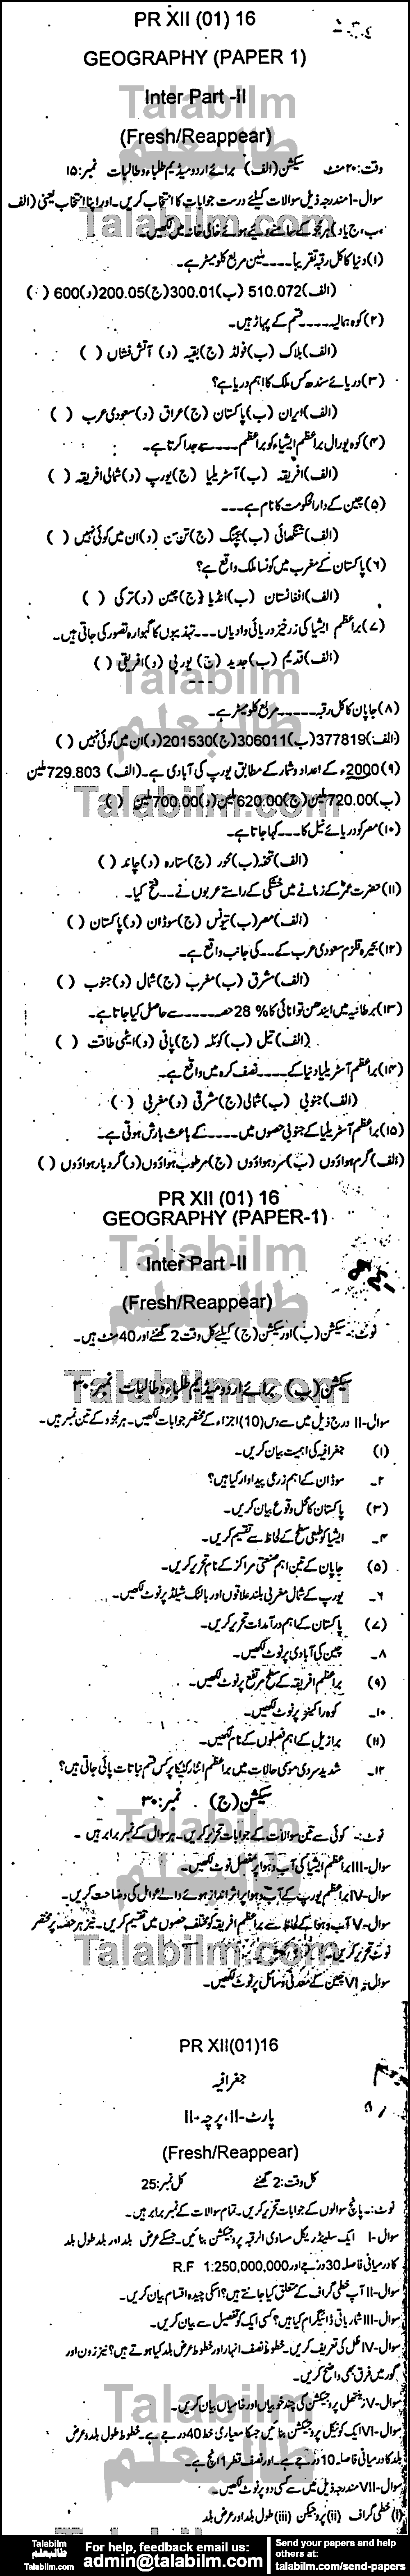 Commercial Geography 0 past paper for Group-I 2016